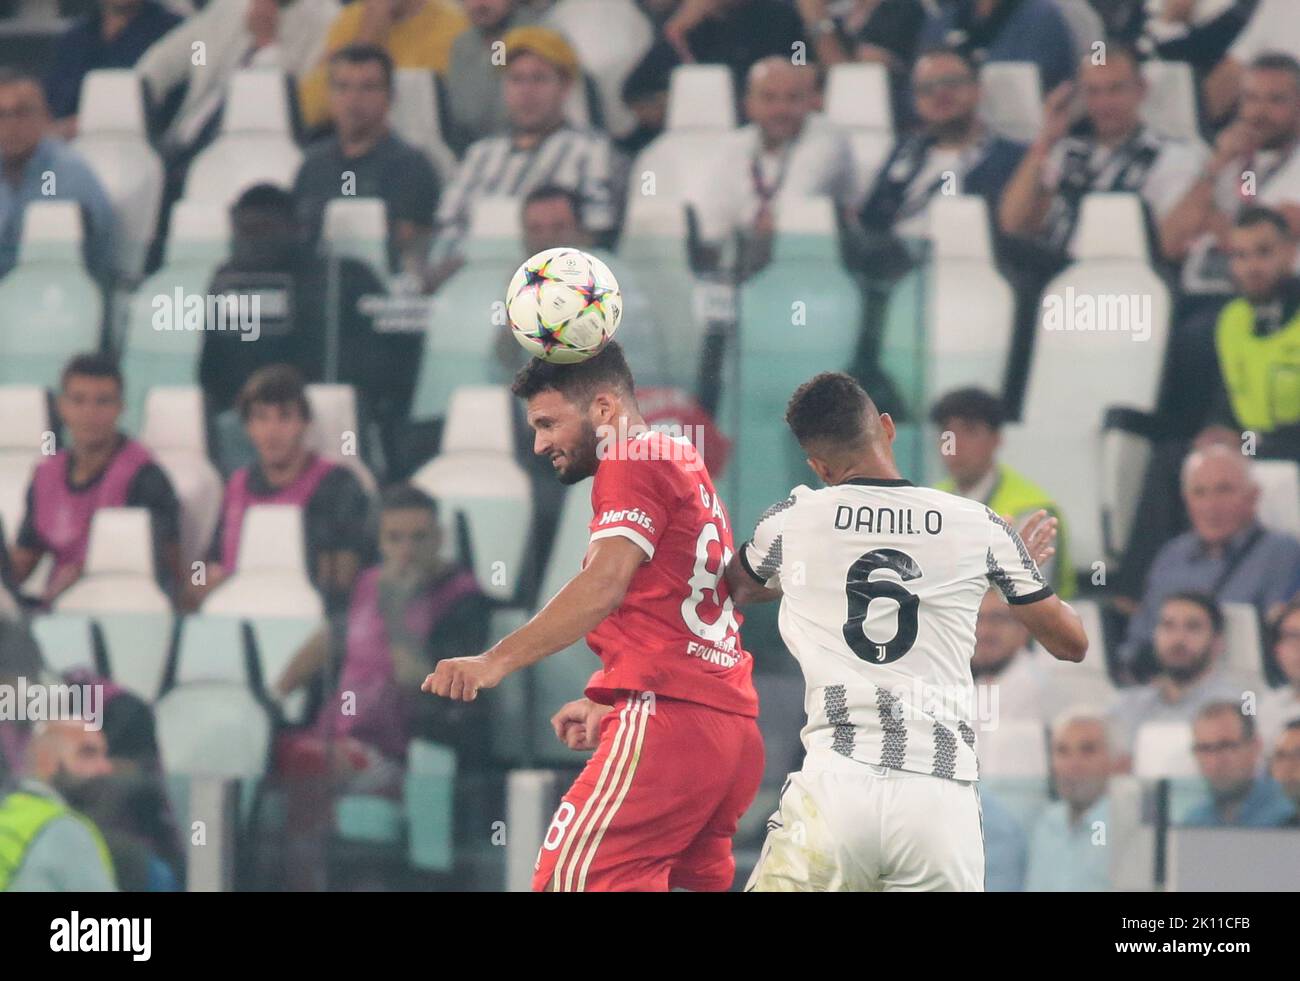 Turin, Italy. 14th Sep, 2022. Luiz Da Silva Danilo of Juventus Fc and Goncalo Ramos of Benfica during the UEFA Champions League, Group H, football match between Juventus Fc and Benfica, o 14 September 2022, at Allianz Stadium, Turin Italy. Photo Nderim Kaceli Credit: Independent Photo Agency/Alamy Live News Stock Photo